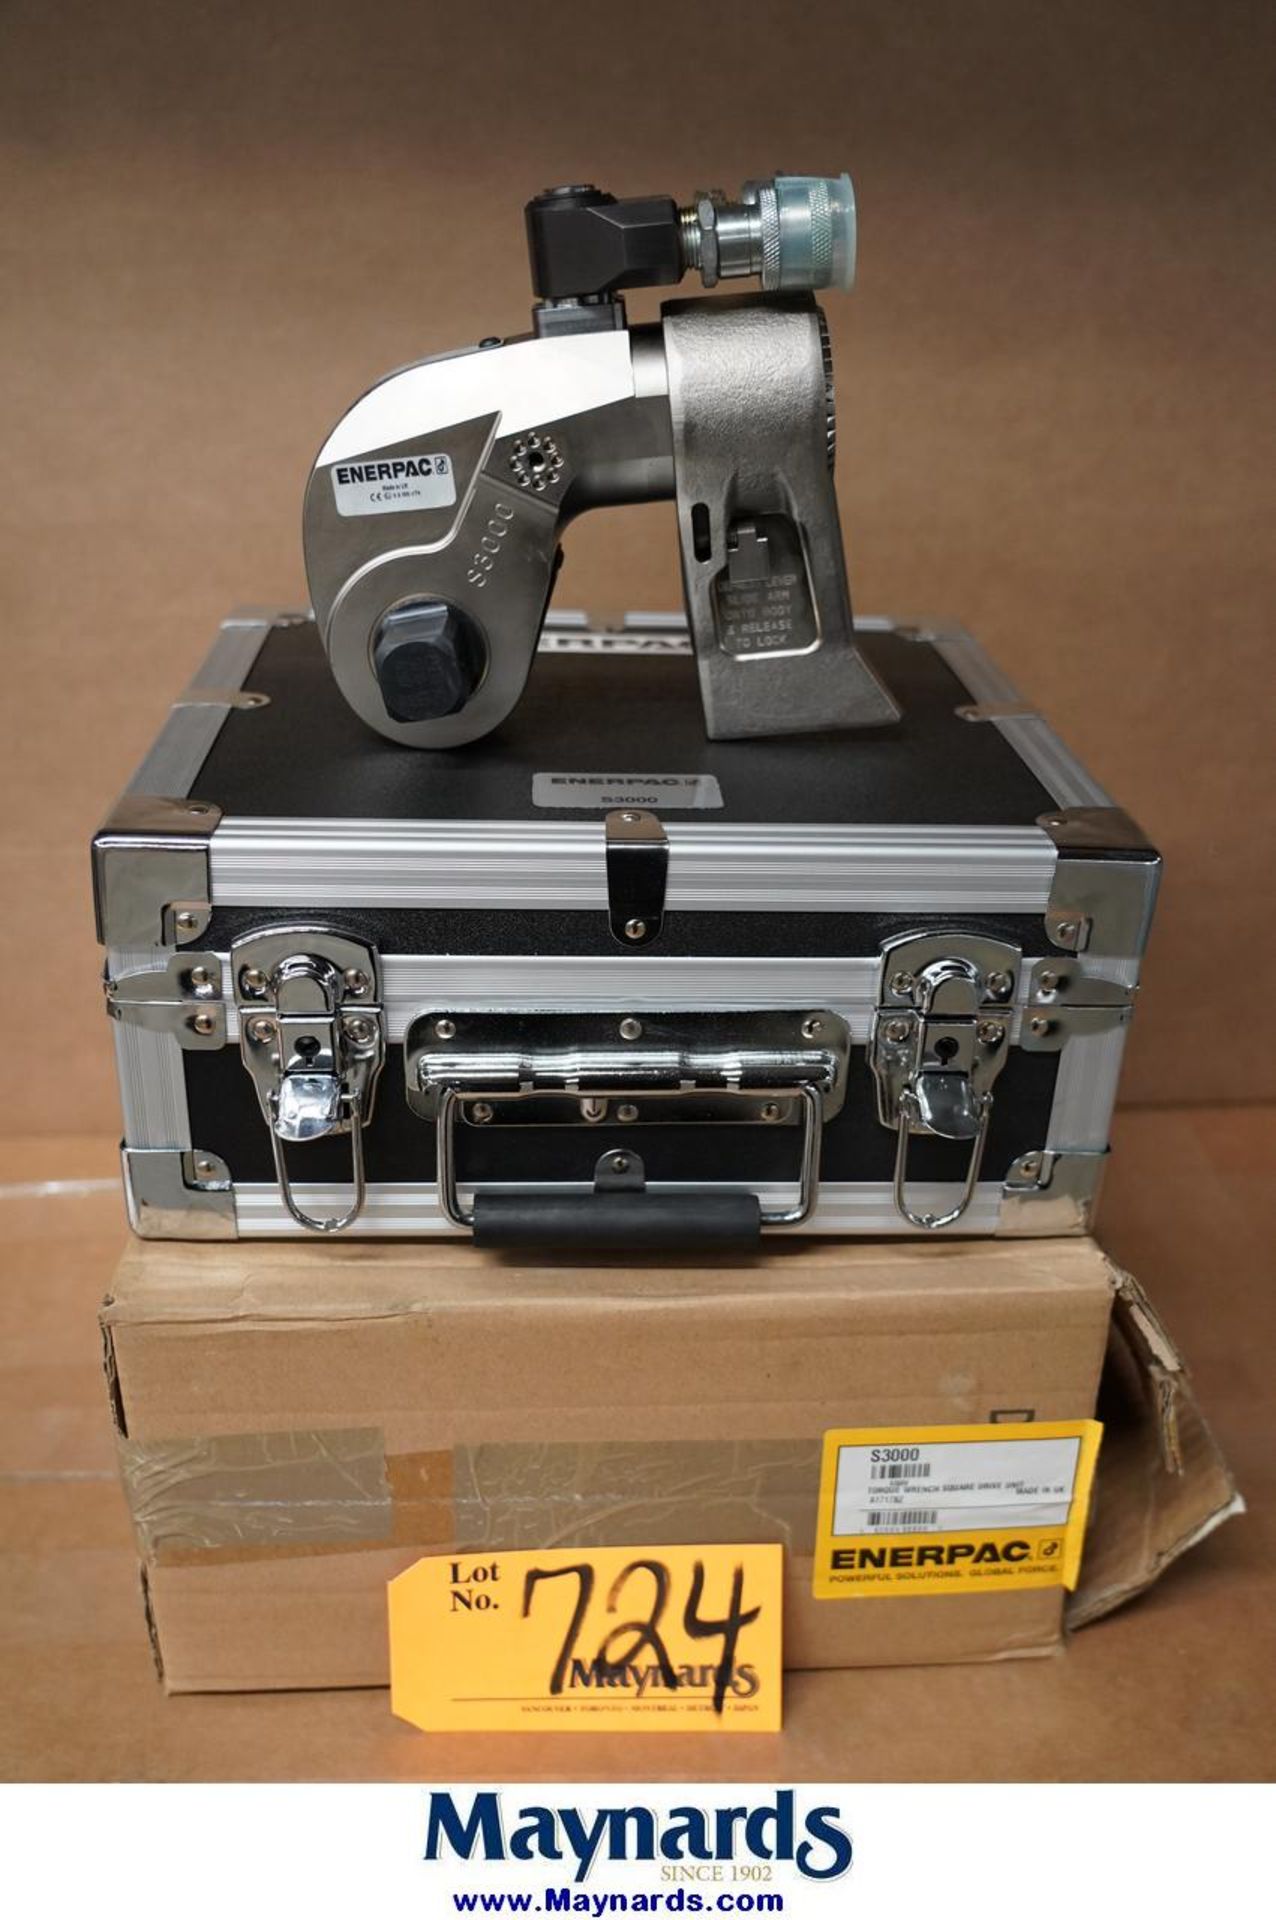 Enerpac S3000X Square Drive Hydraulic Torque Wrench